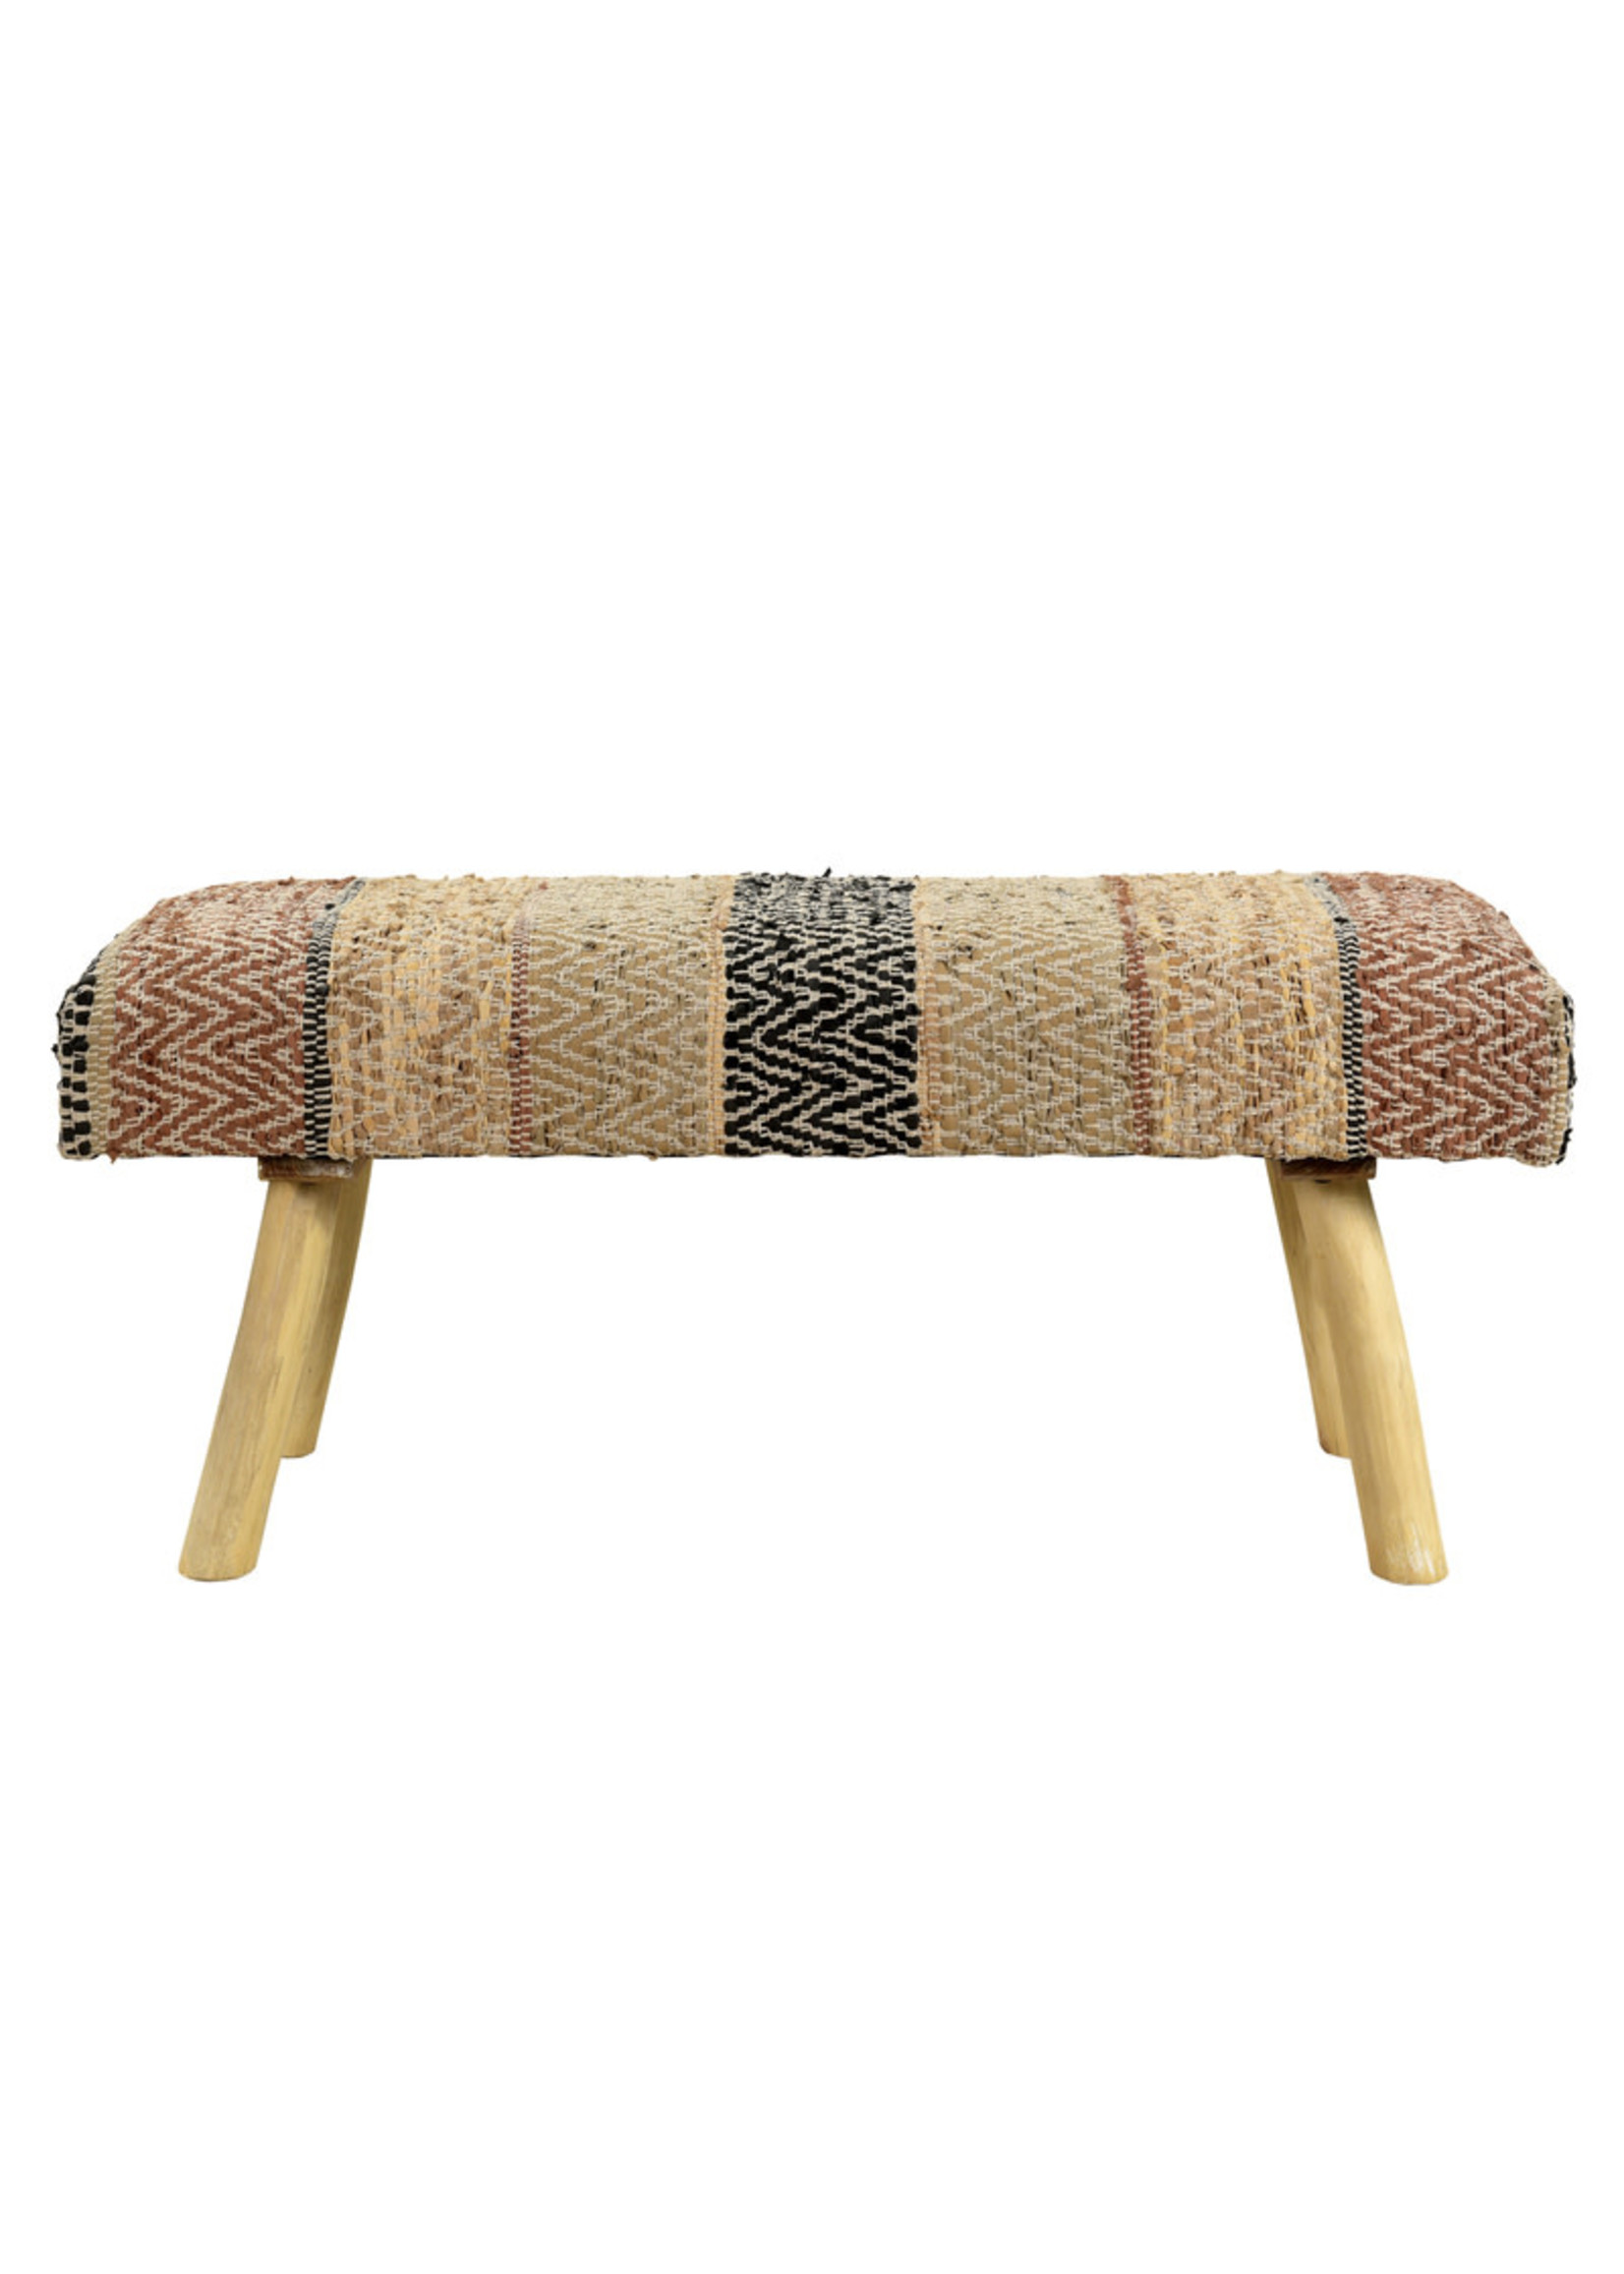 LR Home LR Home Natural Leg Bench Woven Multi Suede